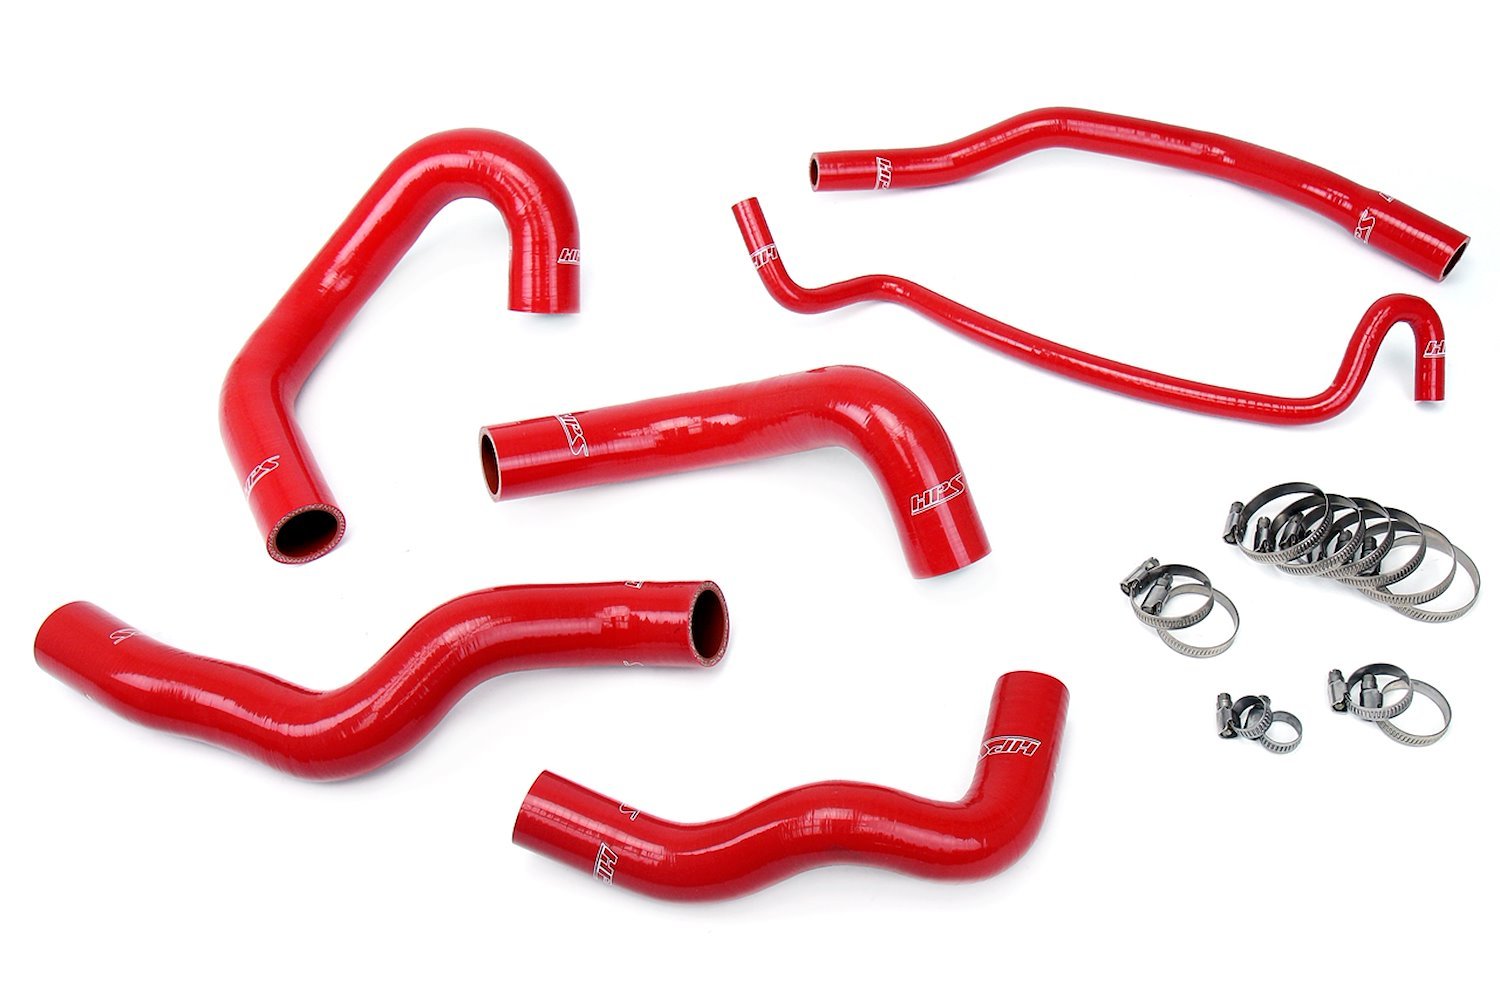 57-1013-RED Radiator Hose Kit, High-Temp 3-Ply Reinforced Silicone, Replace OEM Rubber Radiator Coolant Hoses